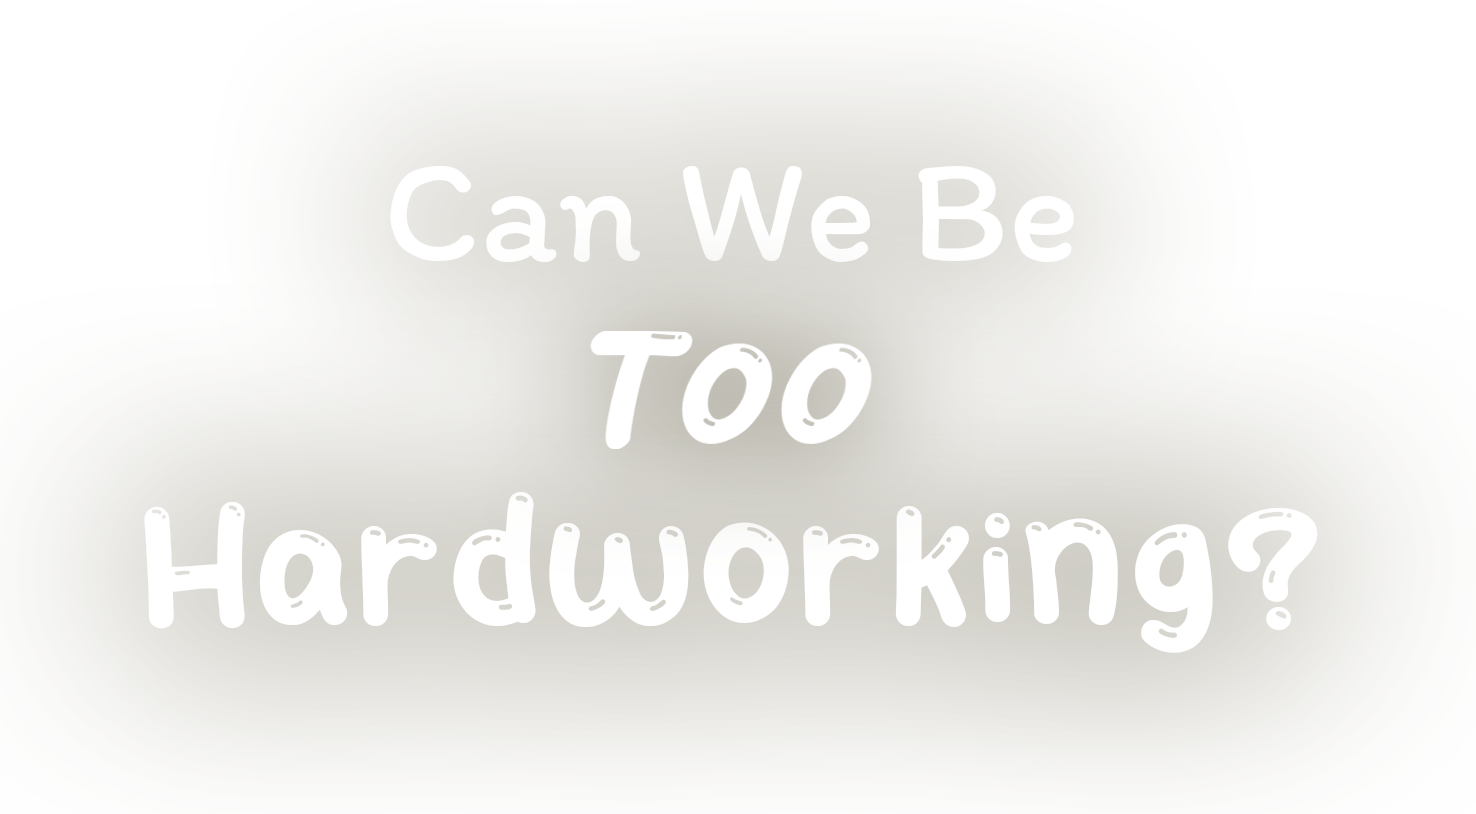 Can We Be Too Hardworking?